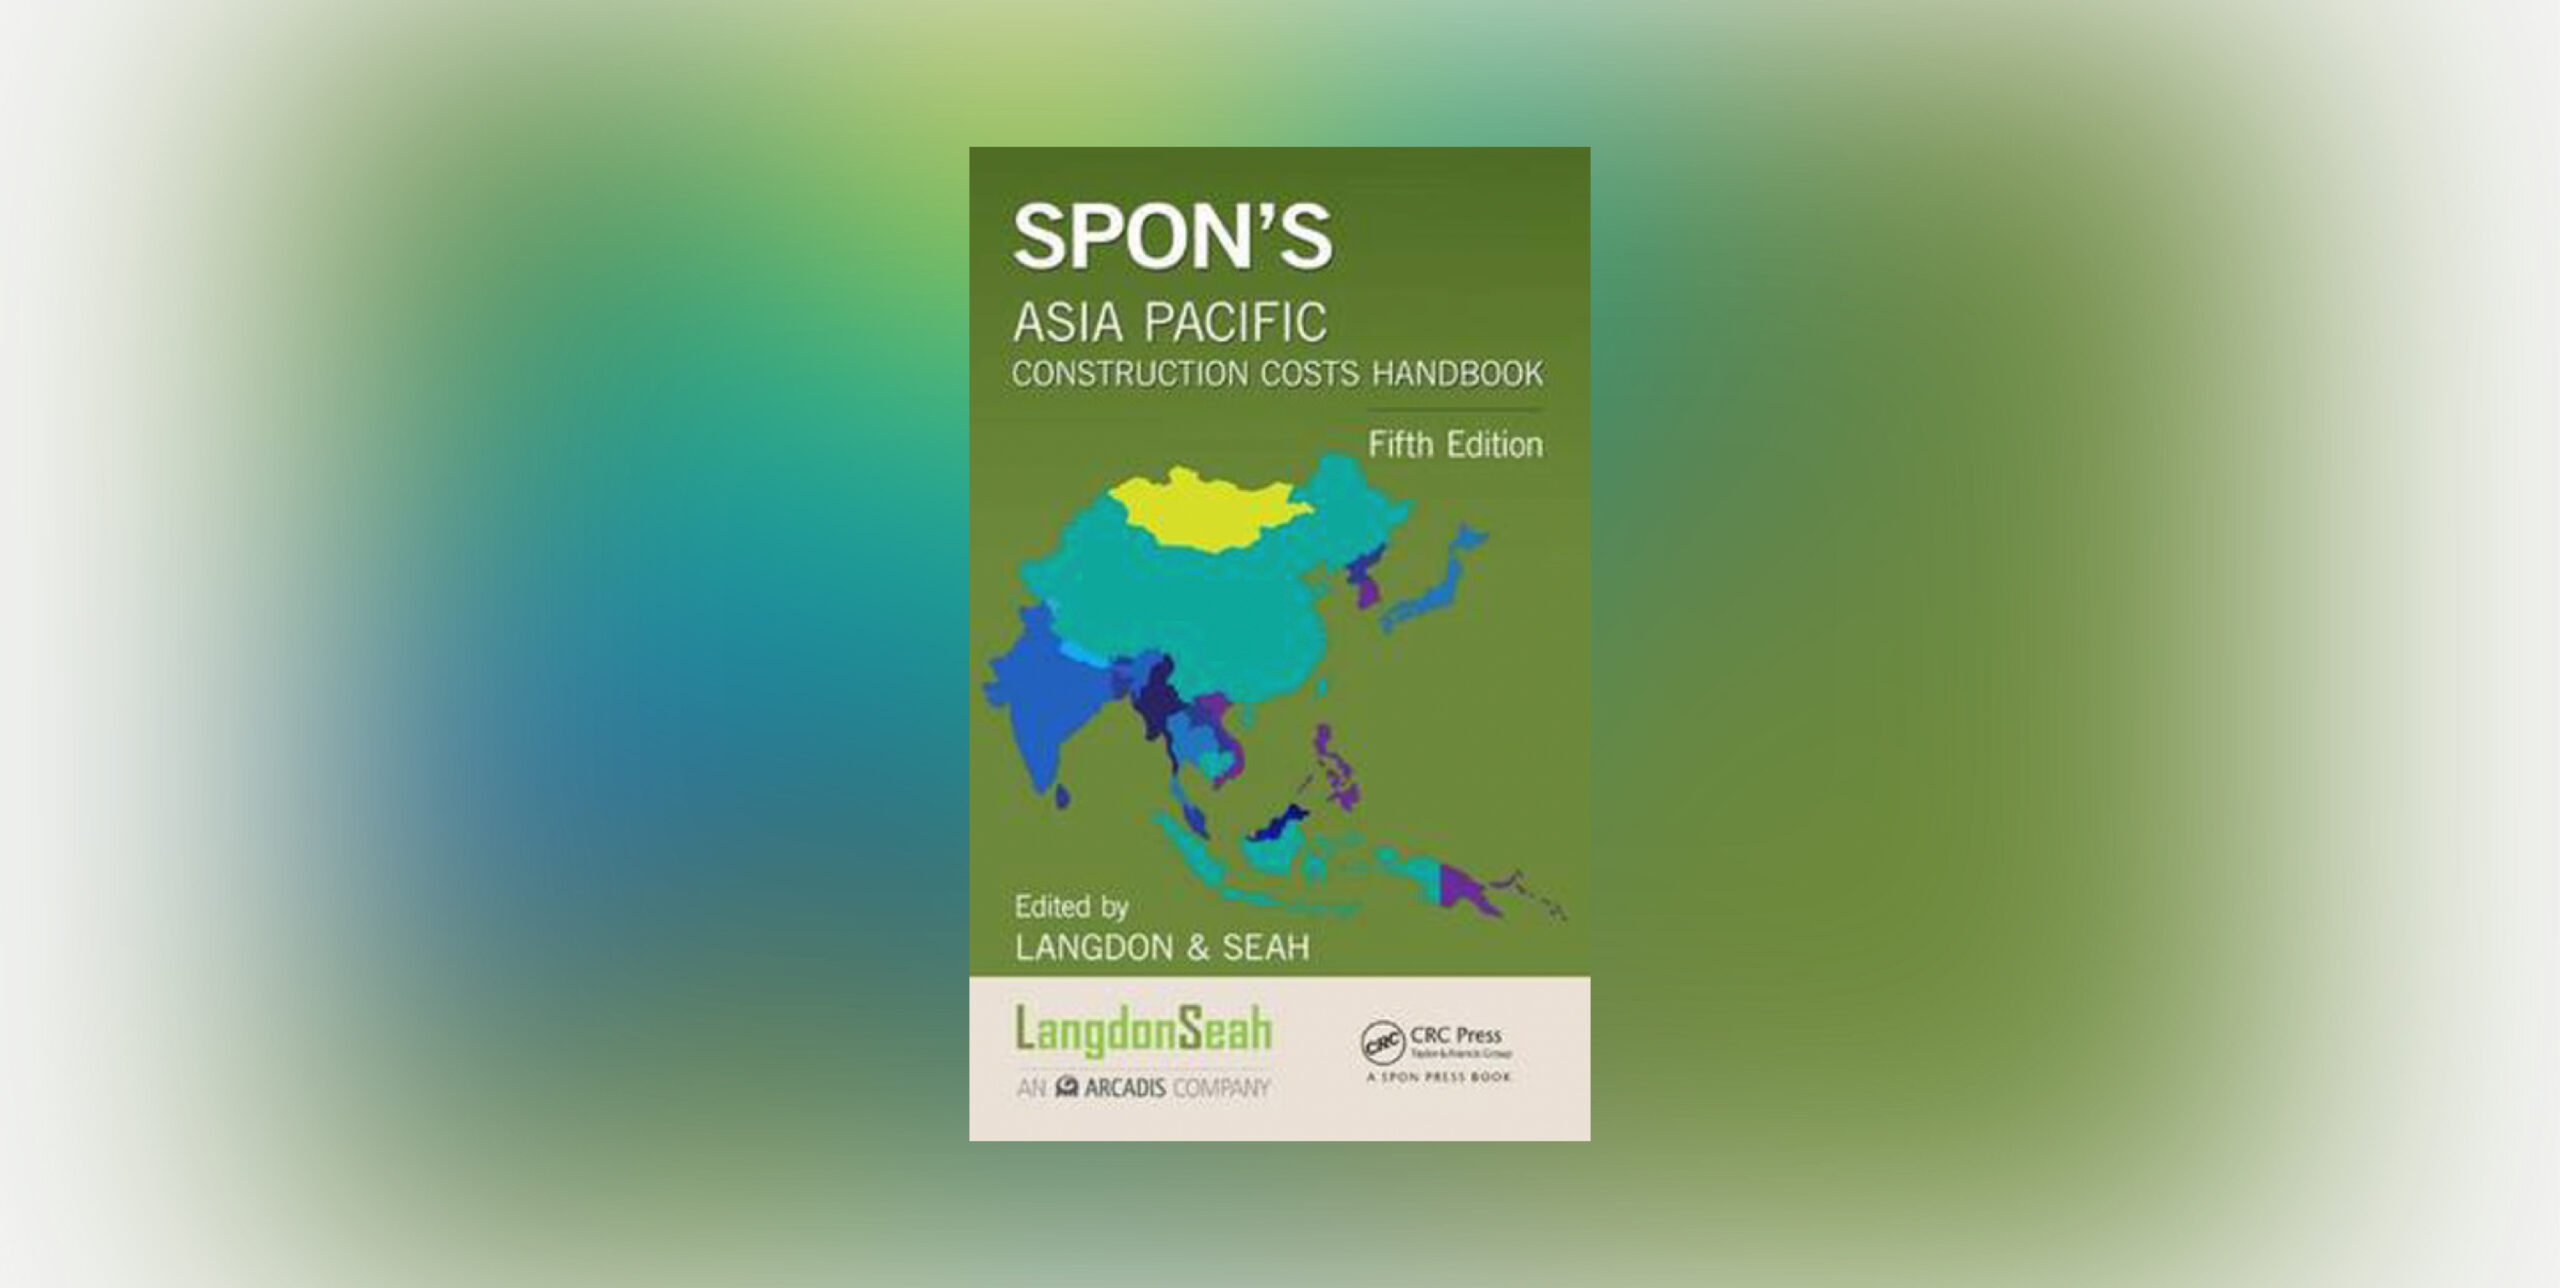 Spon's Asia Pacific book on green back ground